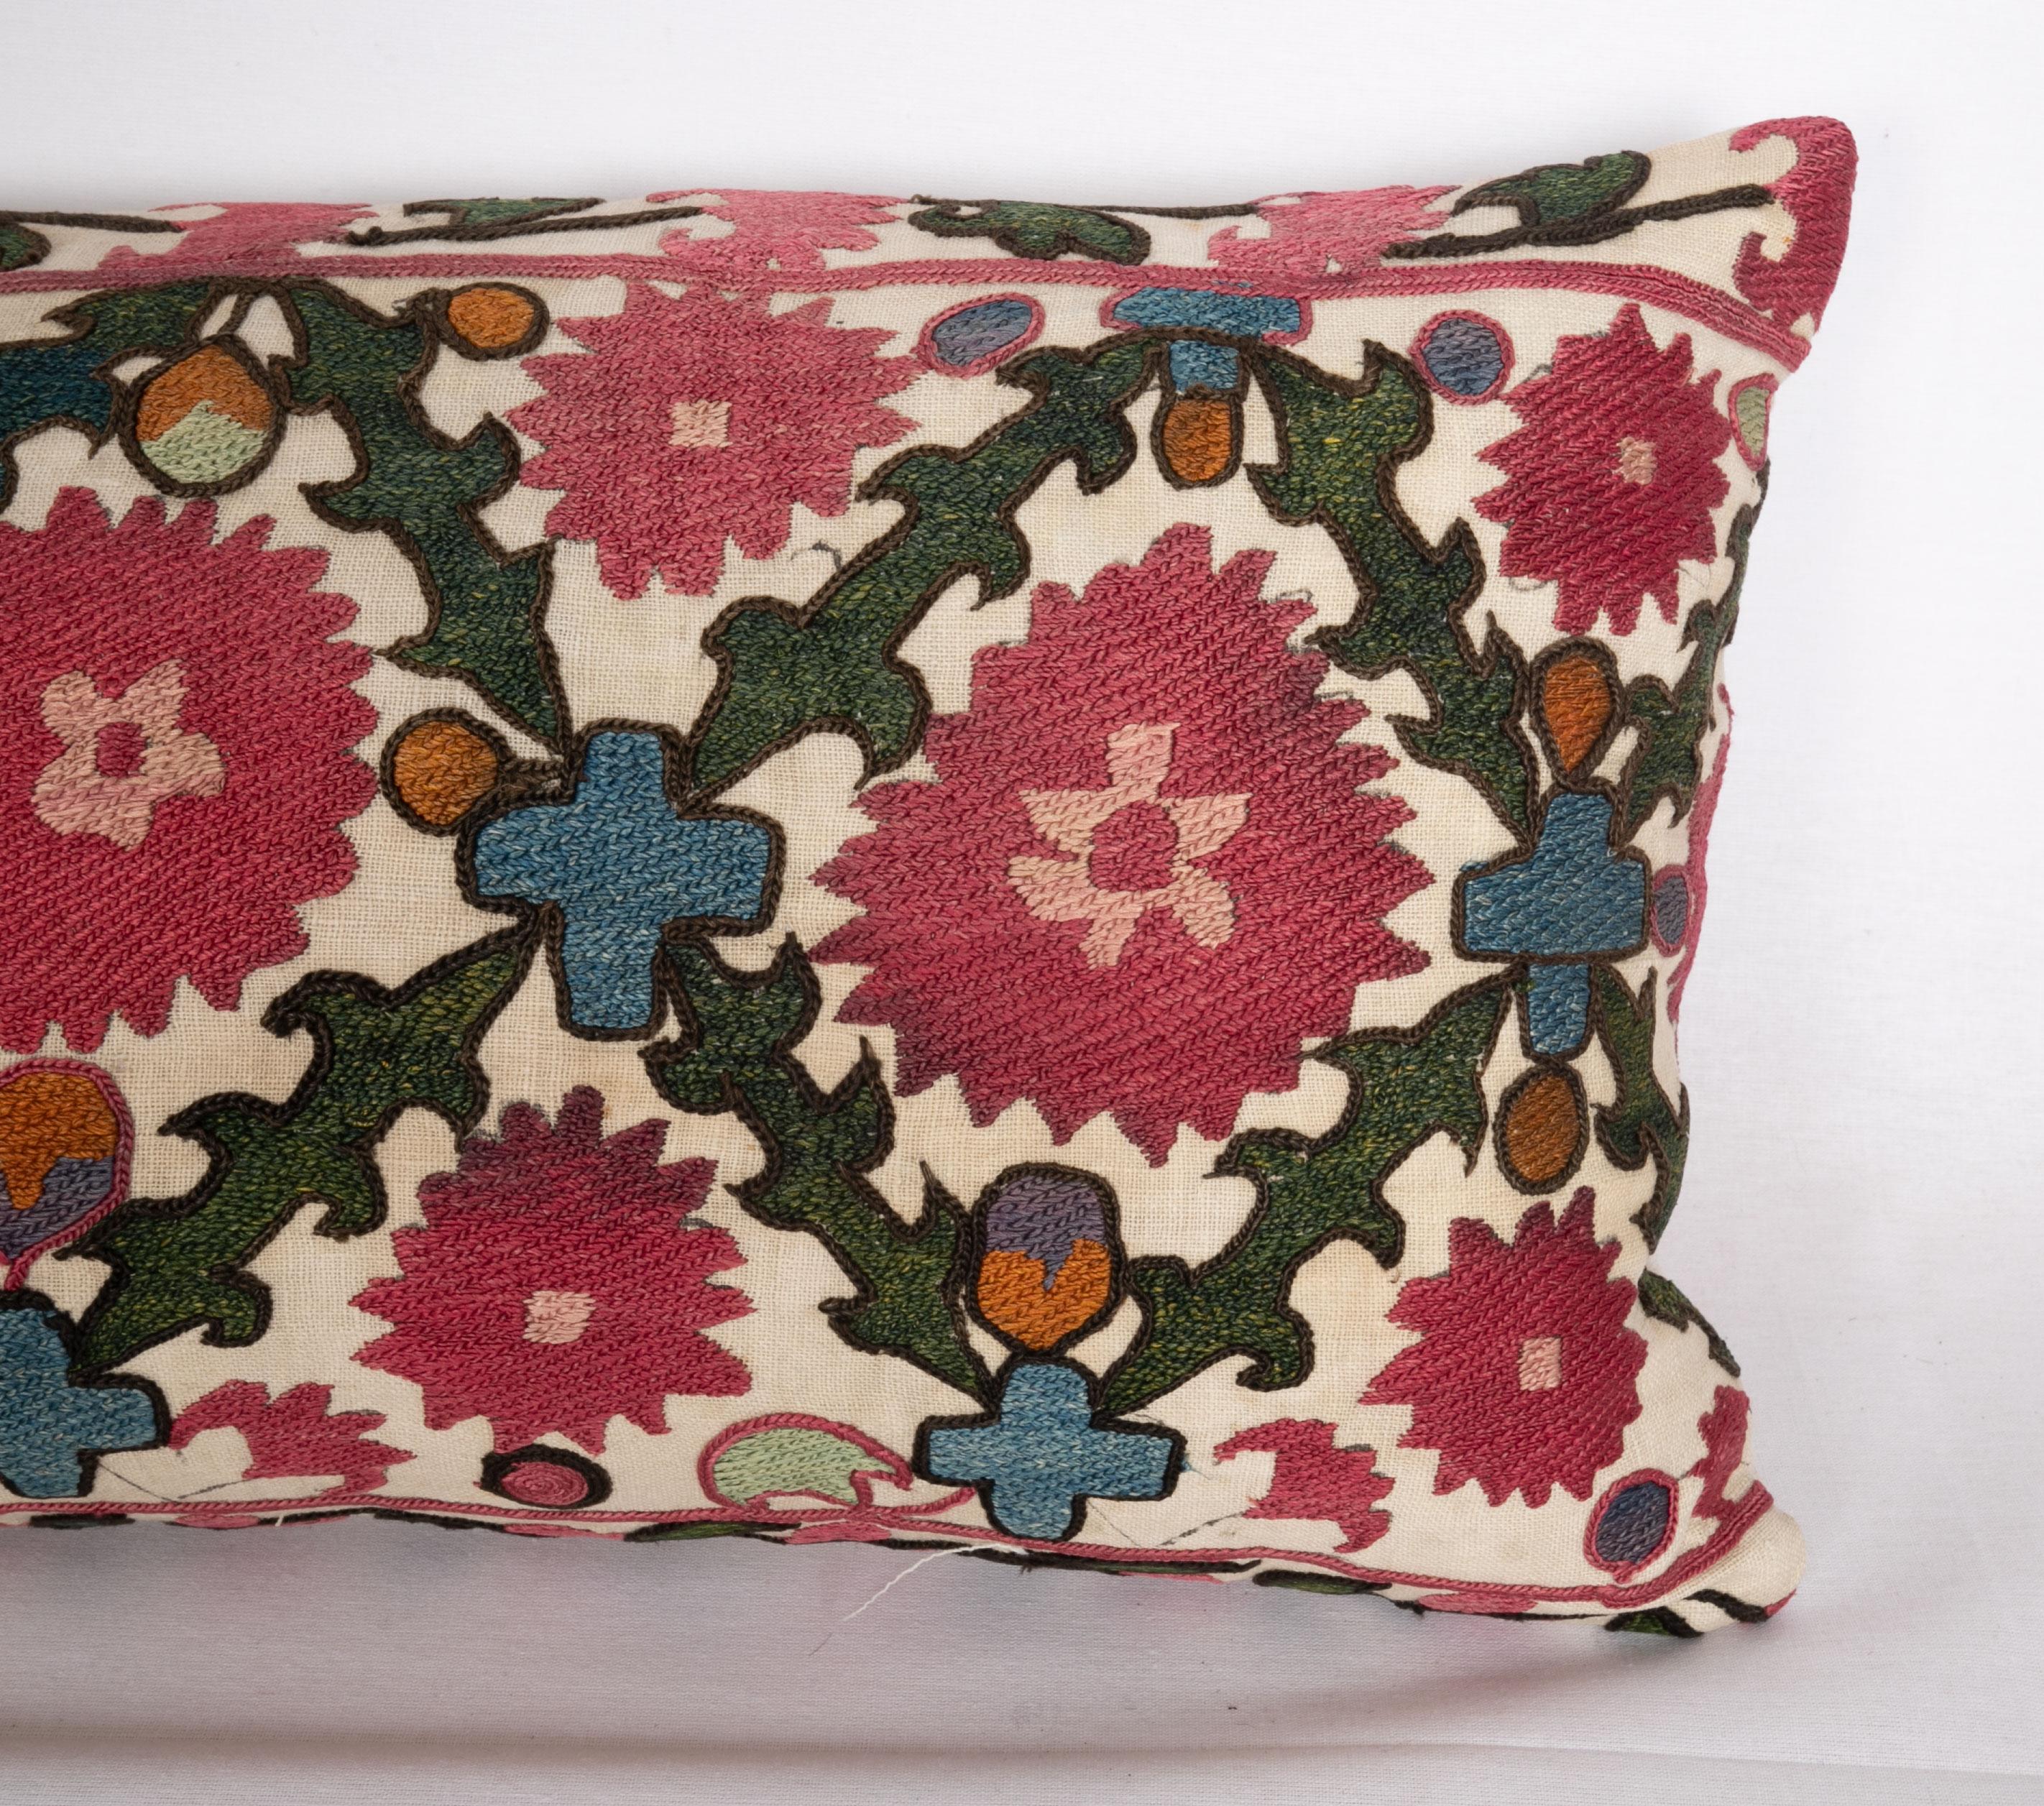 Embroidered Antique Suzani Pillow Case Made from a 19th Century Tajik Suzani